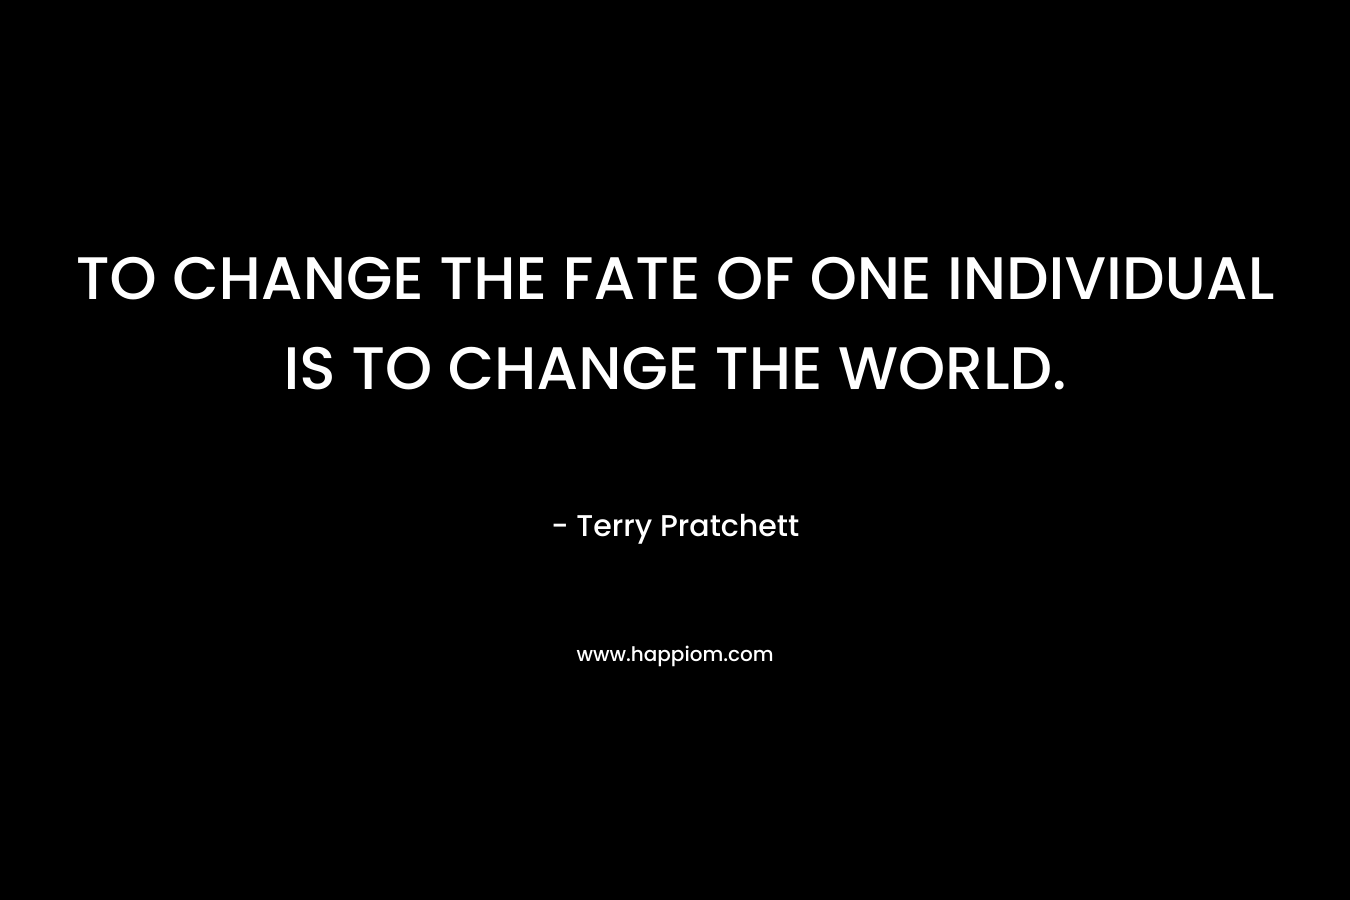 TO CHANGE THE FATE OF ONE INDIVIDUAL IS TO CHANGE THE WORLD.